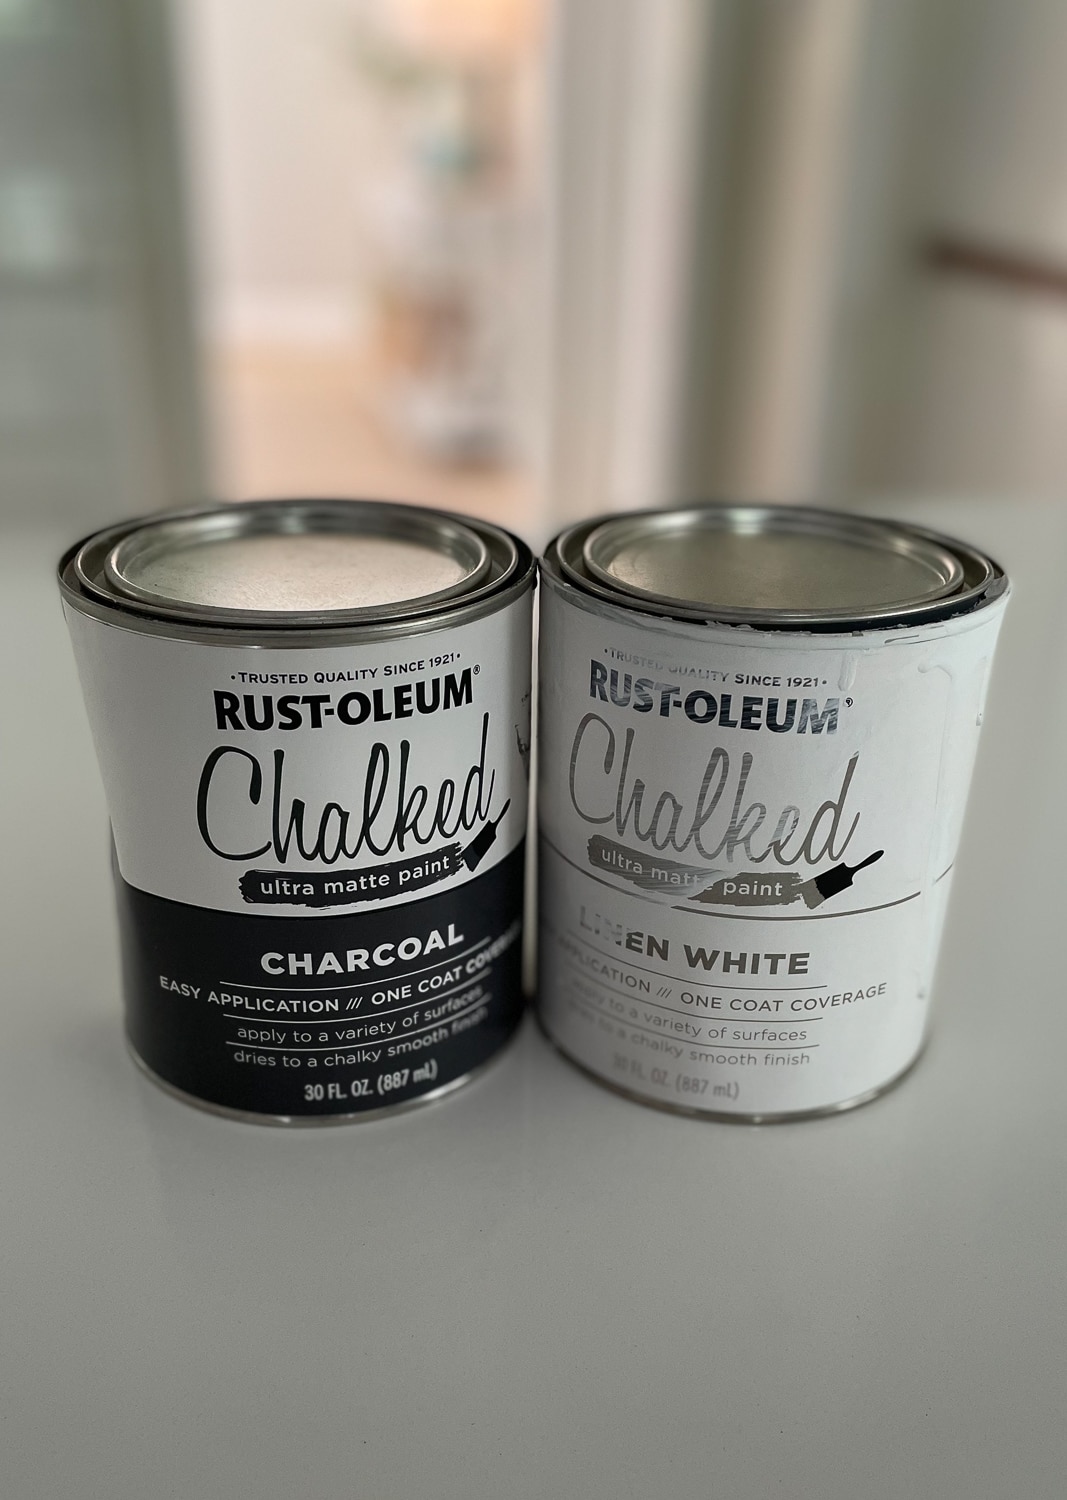 2 cans of rustoleum chalk paint on counter